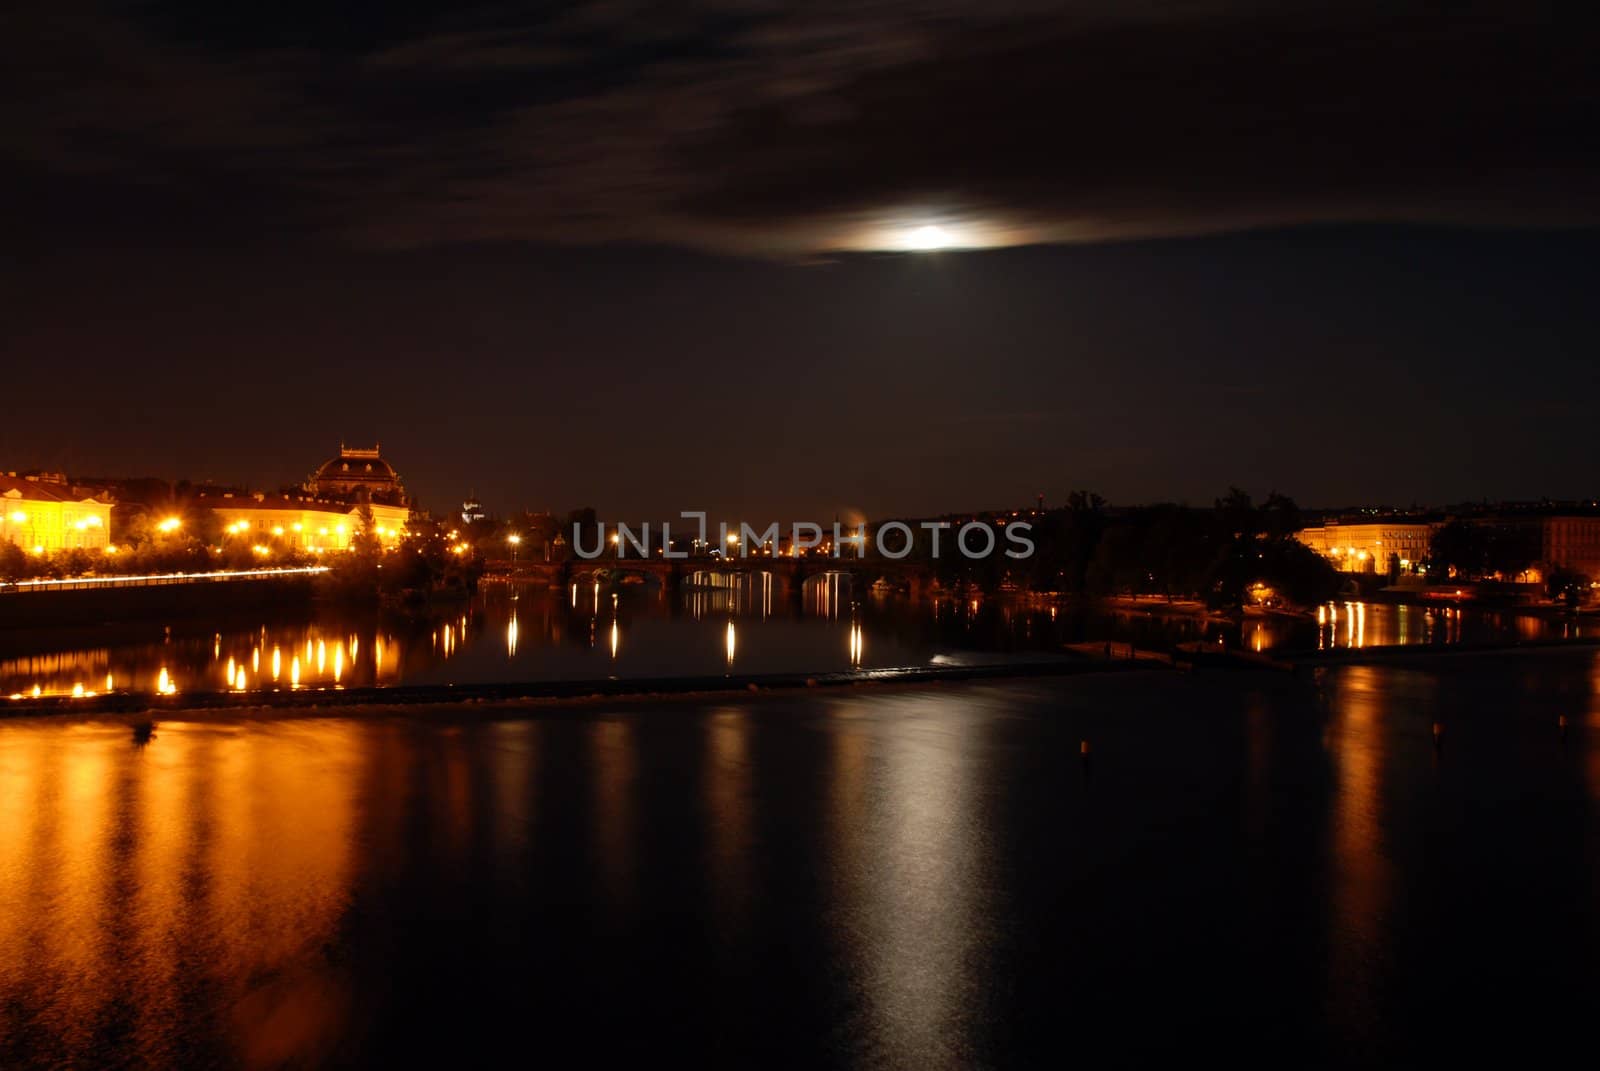 Prague in the night with a full moon mirroring in the river Moldau